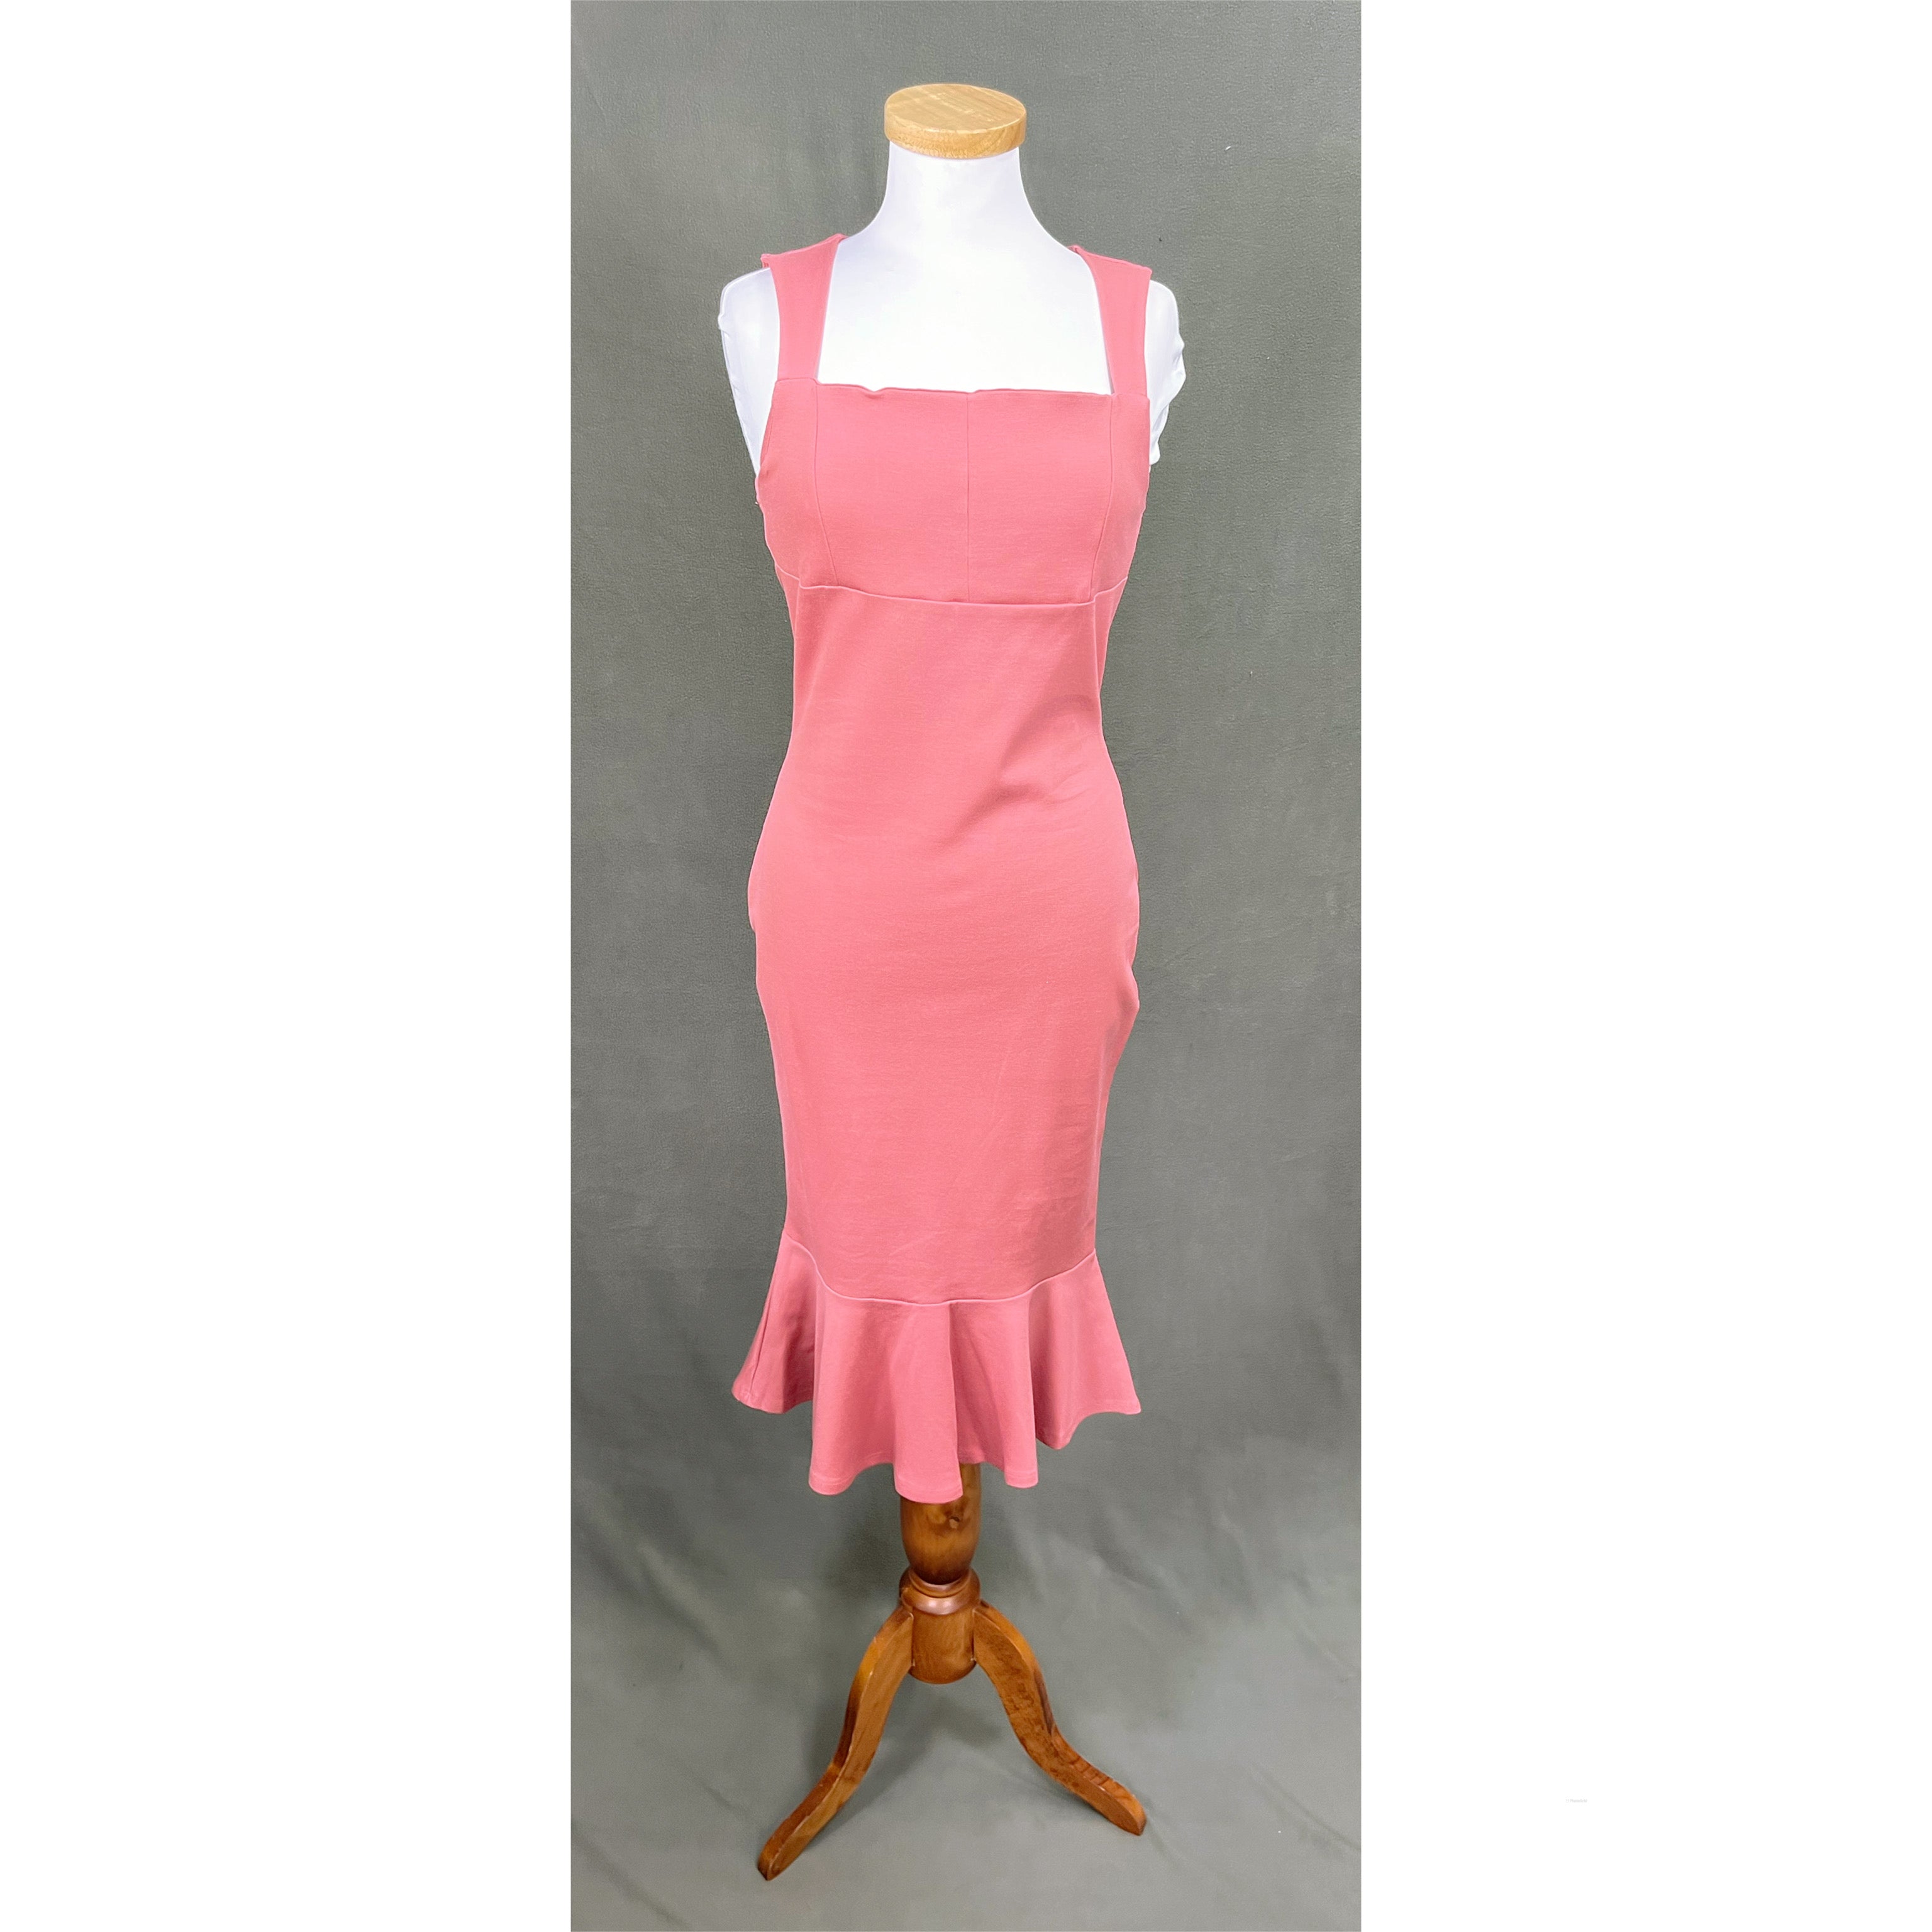 Cefian rose dress, size L, NEW WITH TAGS!